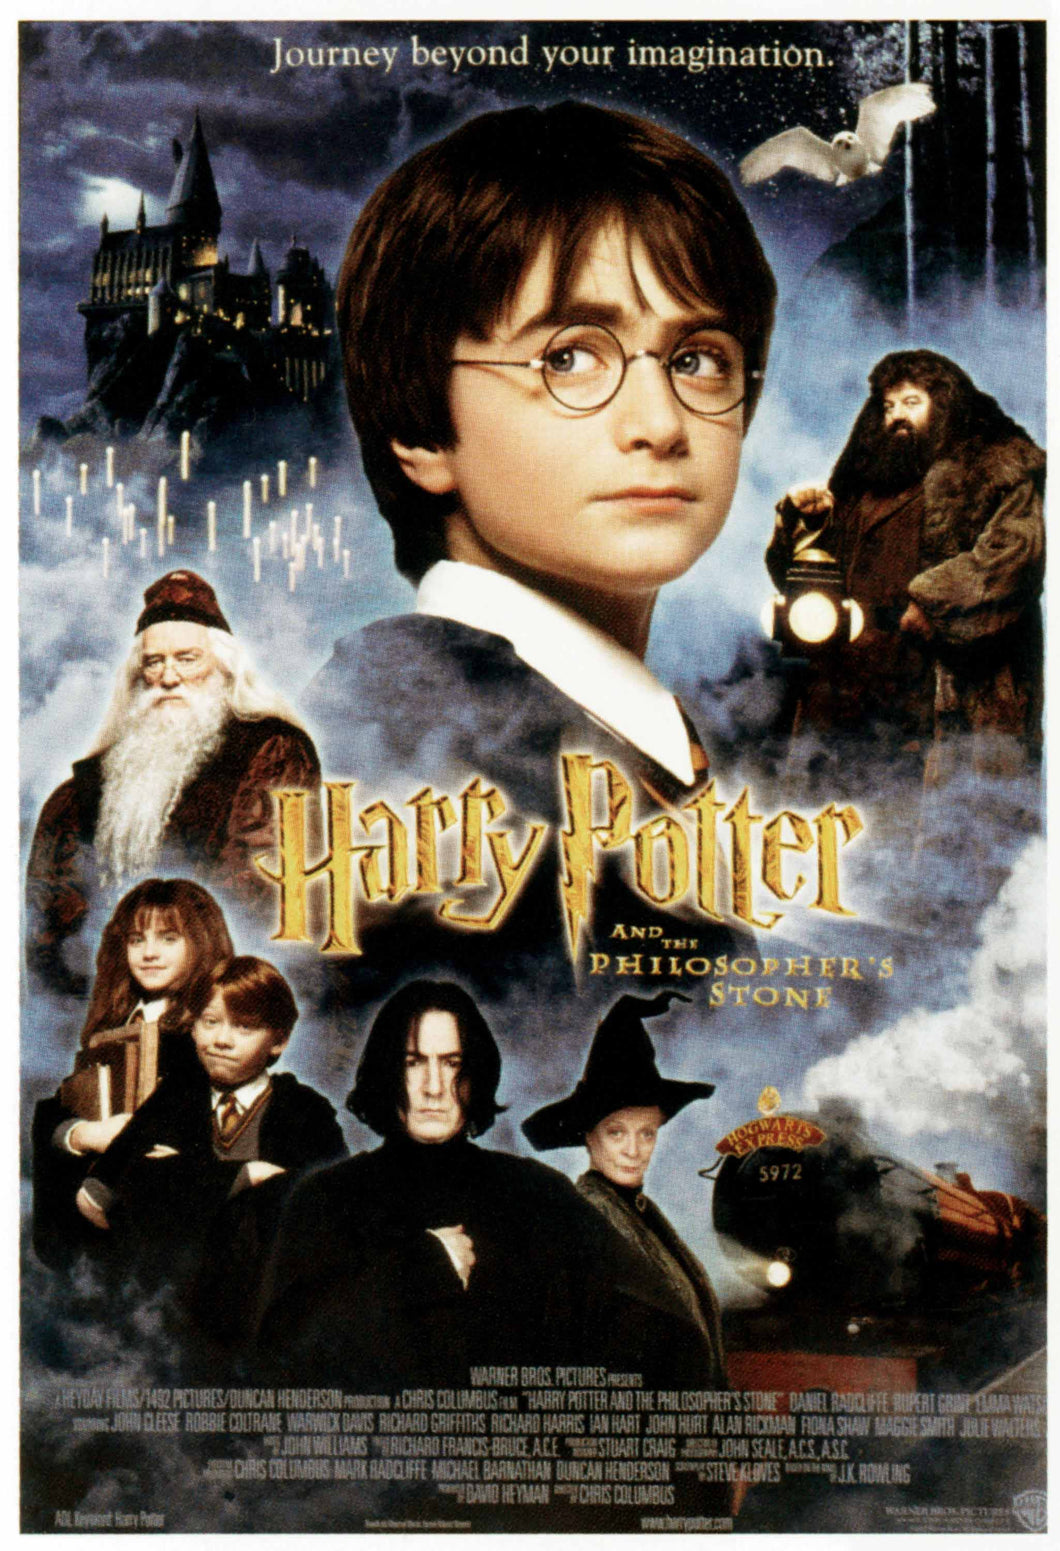 Harry Potter and the Philosophers stone